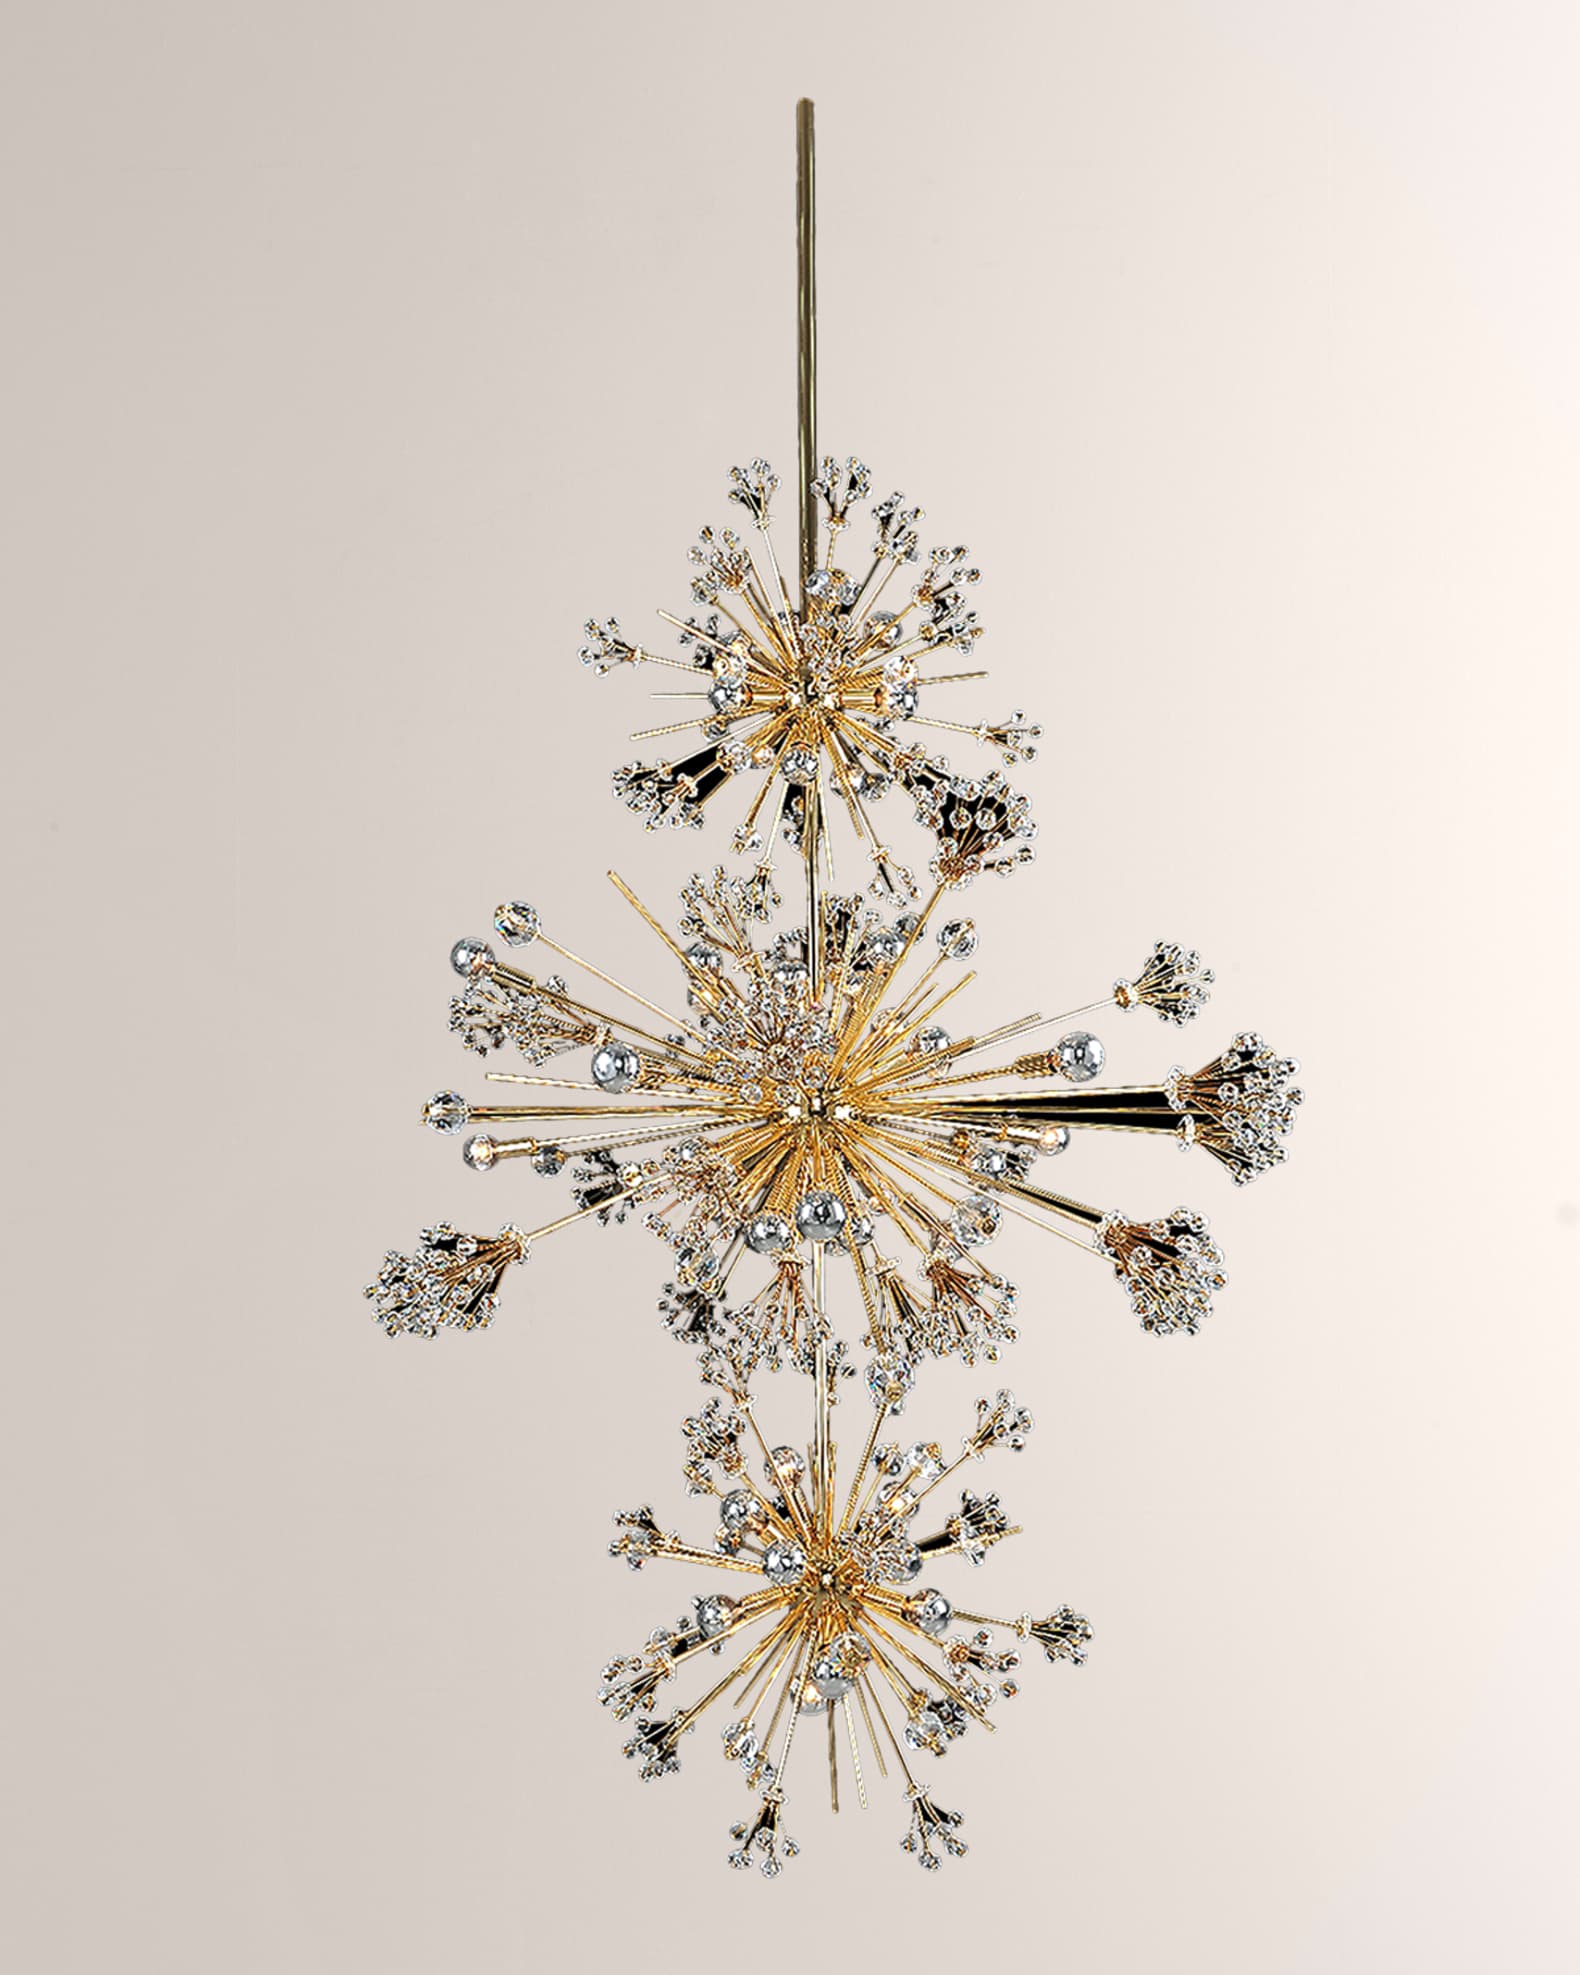 Allegri Crystal by Kalco Lighting Constellation 50-Light Tier Pendant | Horchow